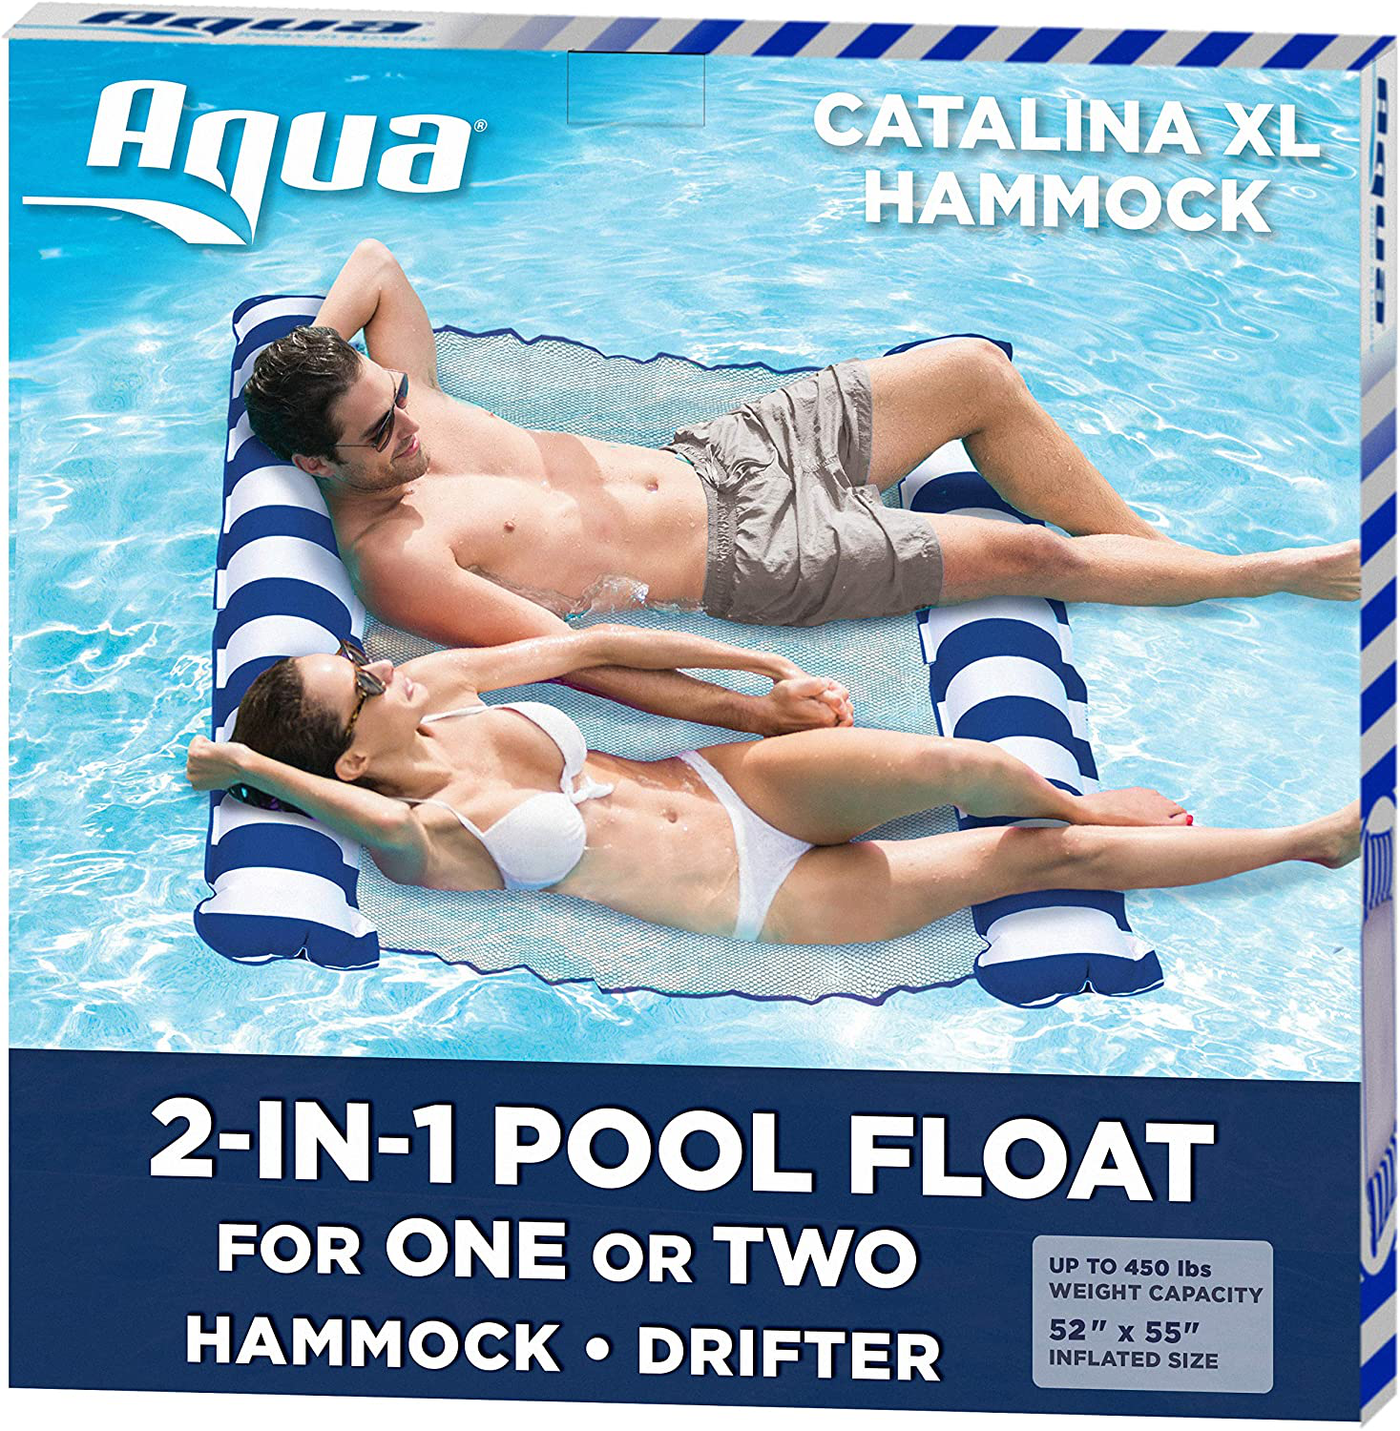 Aqua Catalina XL Hammock, 4-in-1 Multi-Purpose Inflatable 1-2 Person Pool Float, Water Lounge, Navy/White Stripe